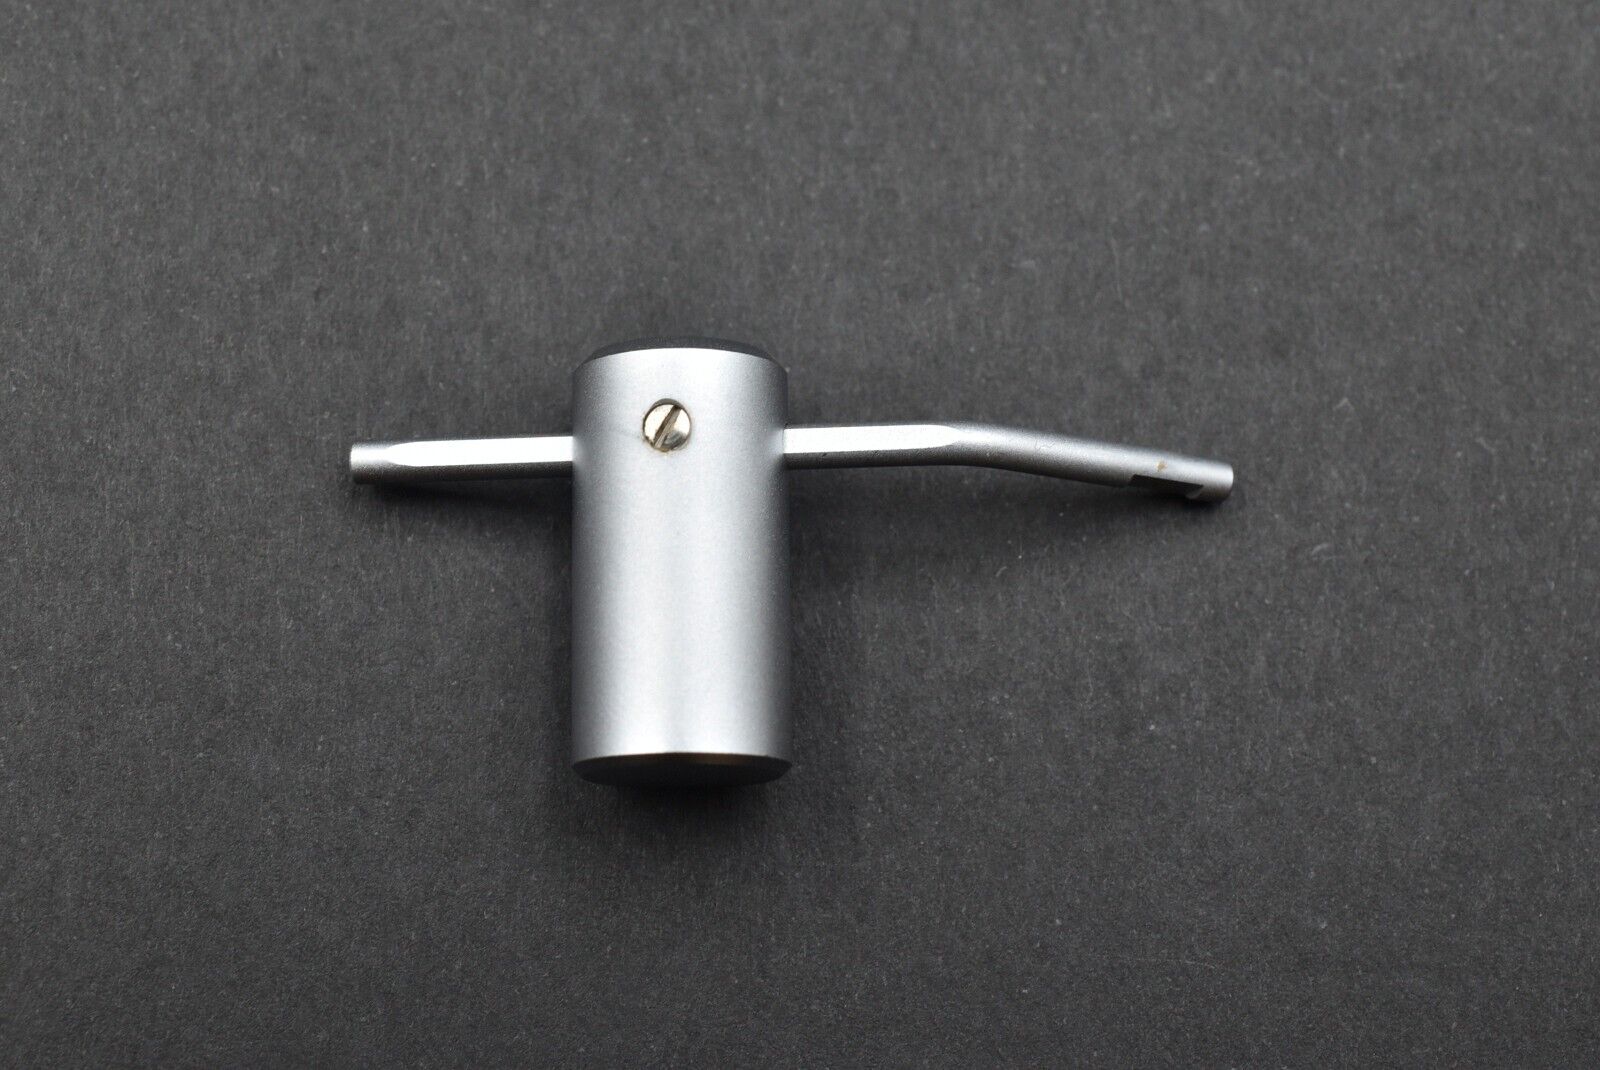 Fidelity Research FR FR-24 MKII/MK2 Tonearm Arm Lateral Weight